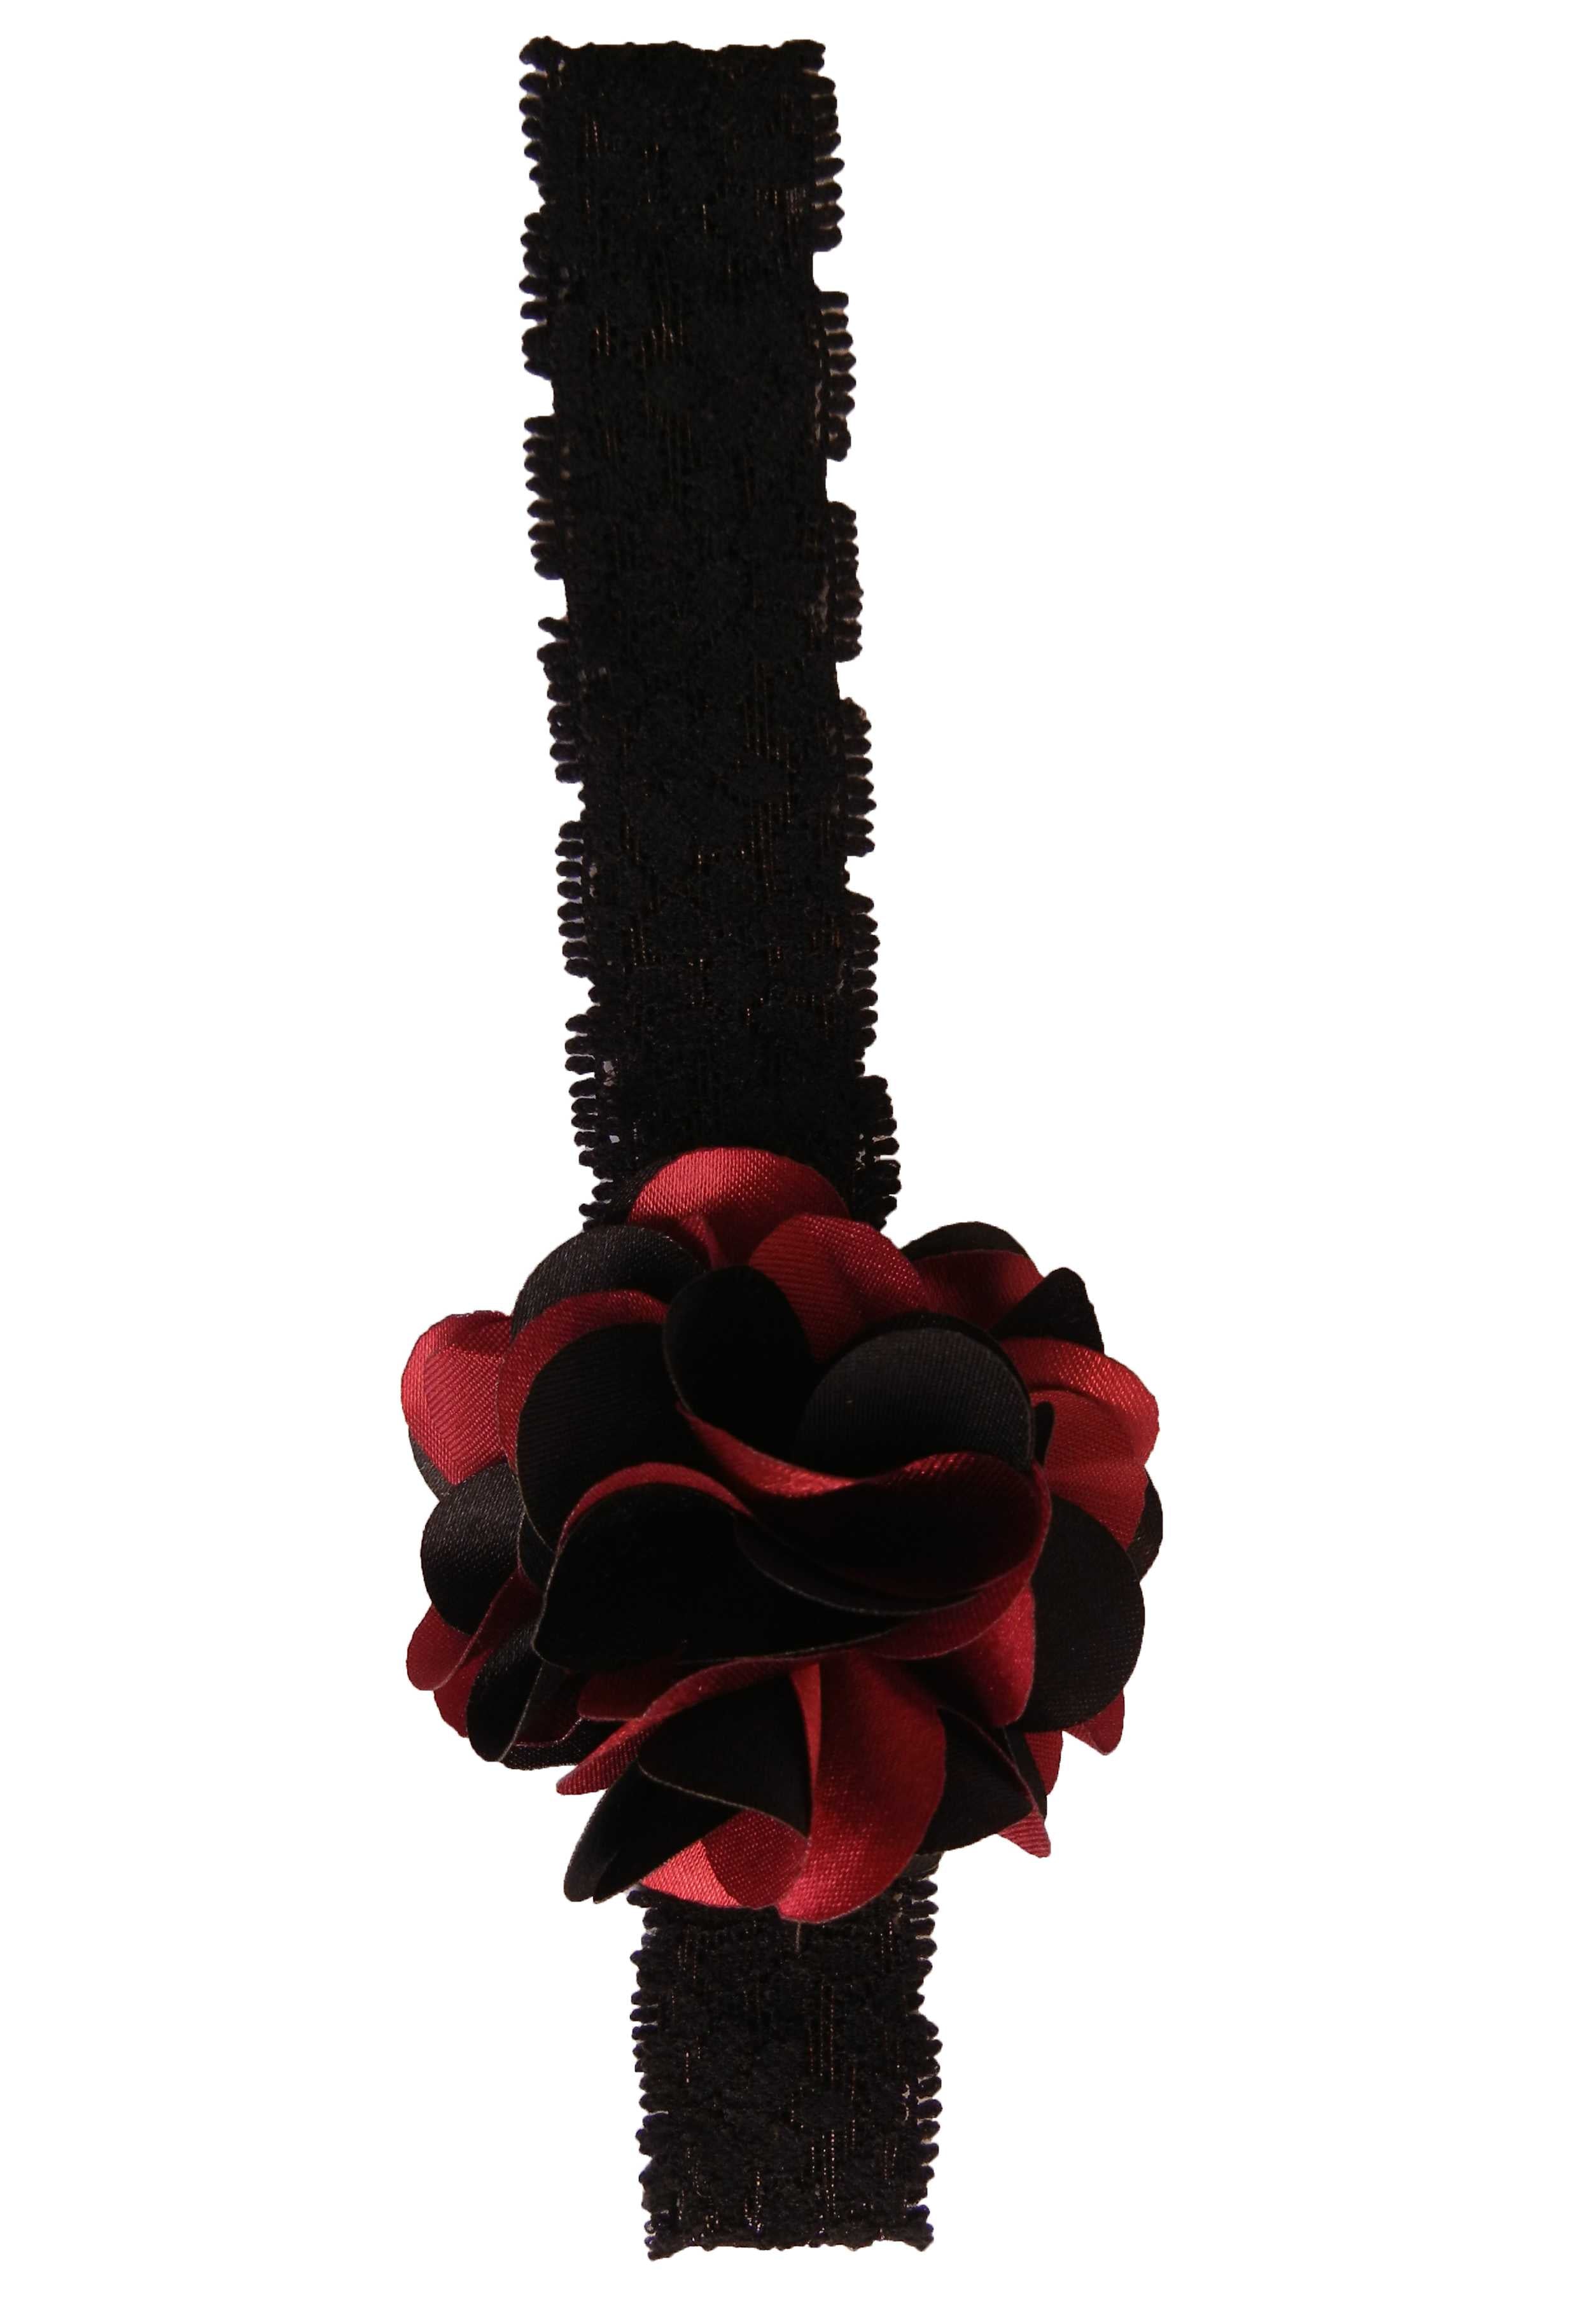 Black & Maroon flower on Black Lace hair bands for girls